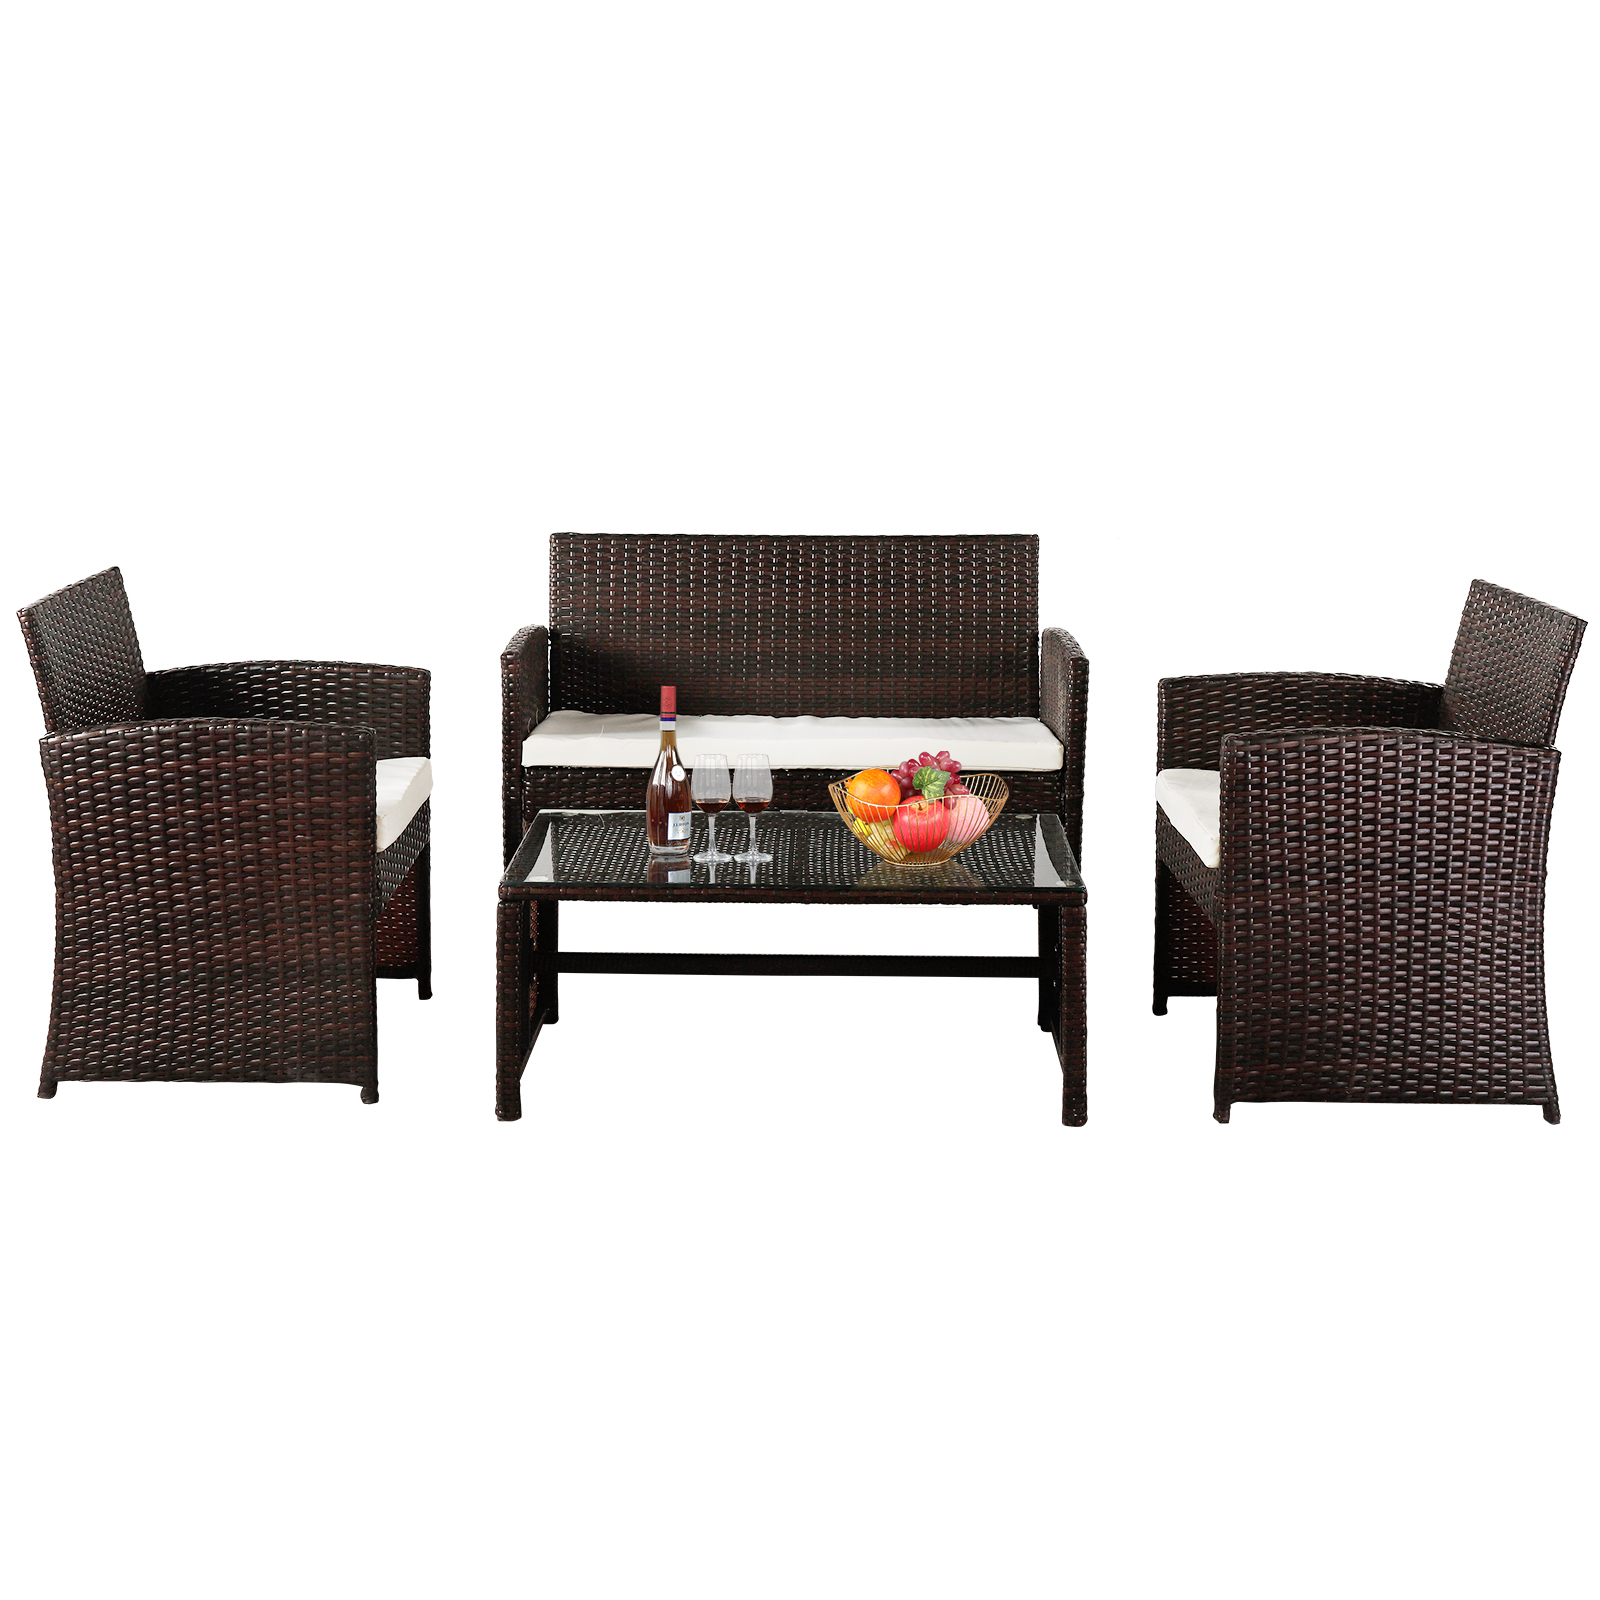 Ktaxon 4 Pcs Outdoor Patio Rattan Wicker Furniture Set Table Sofa Brown With Cushions - image 1 of 11